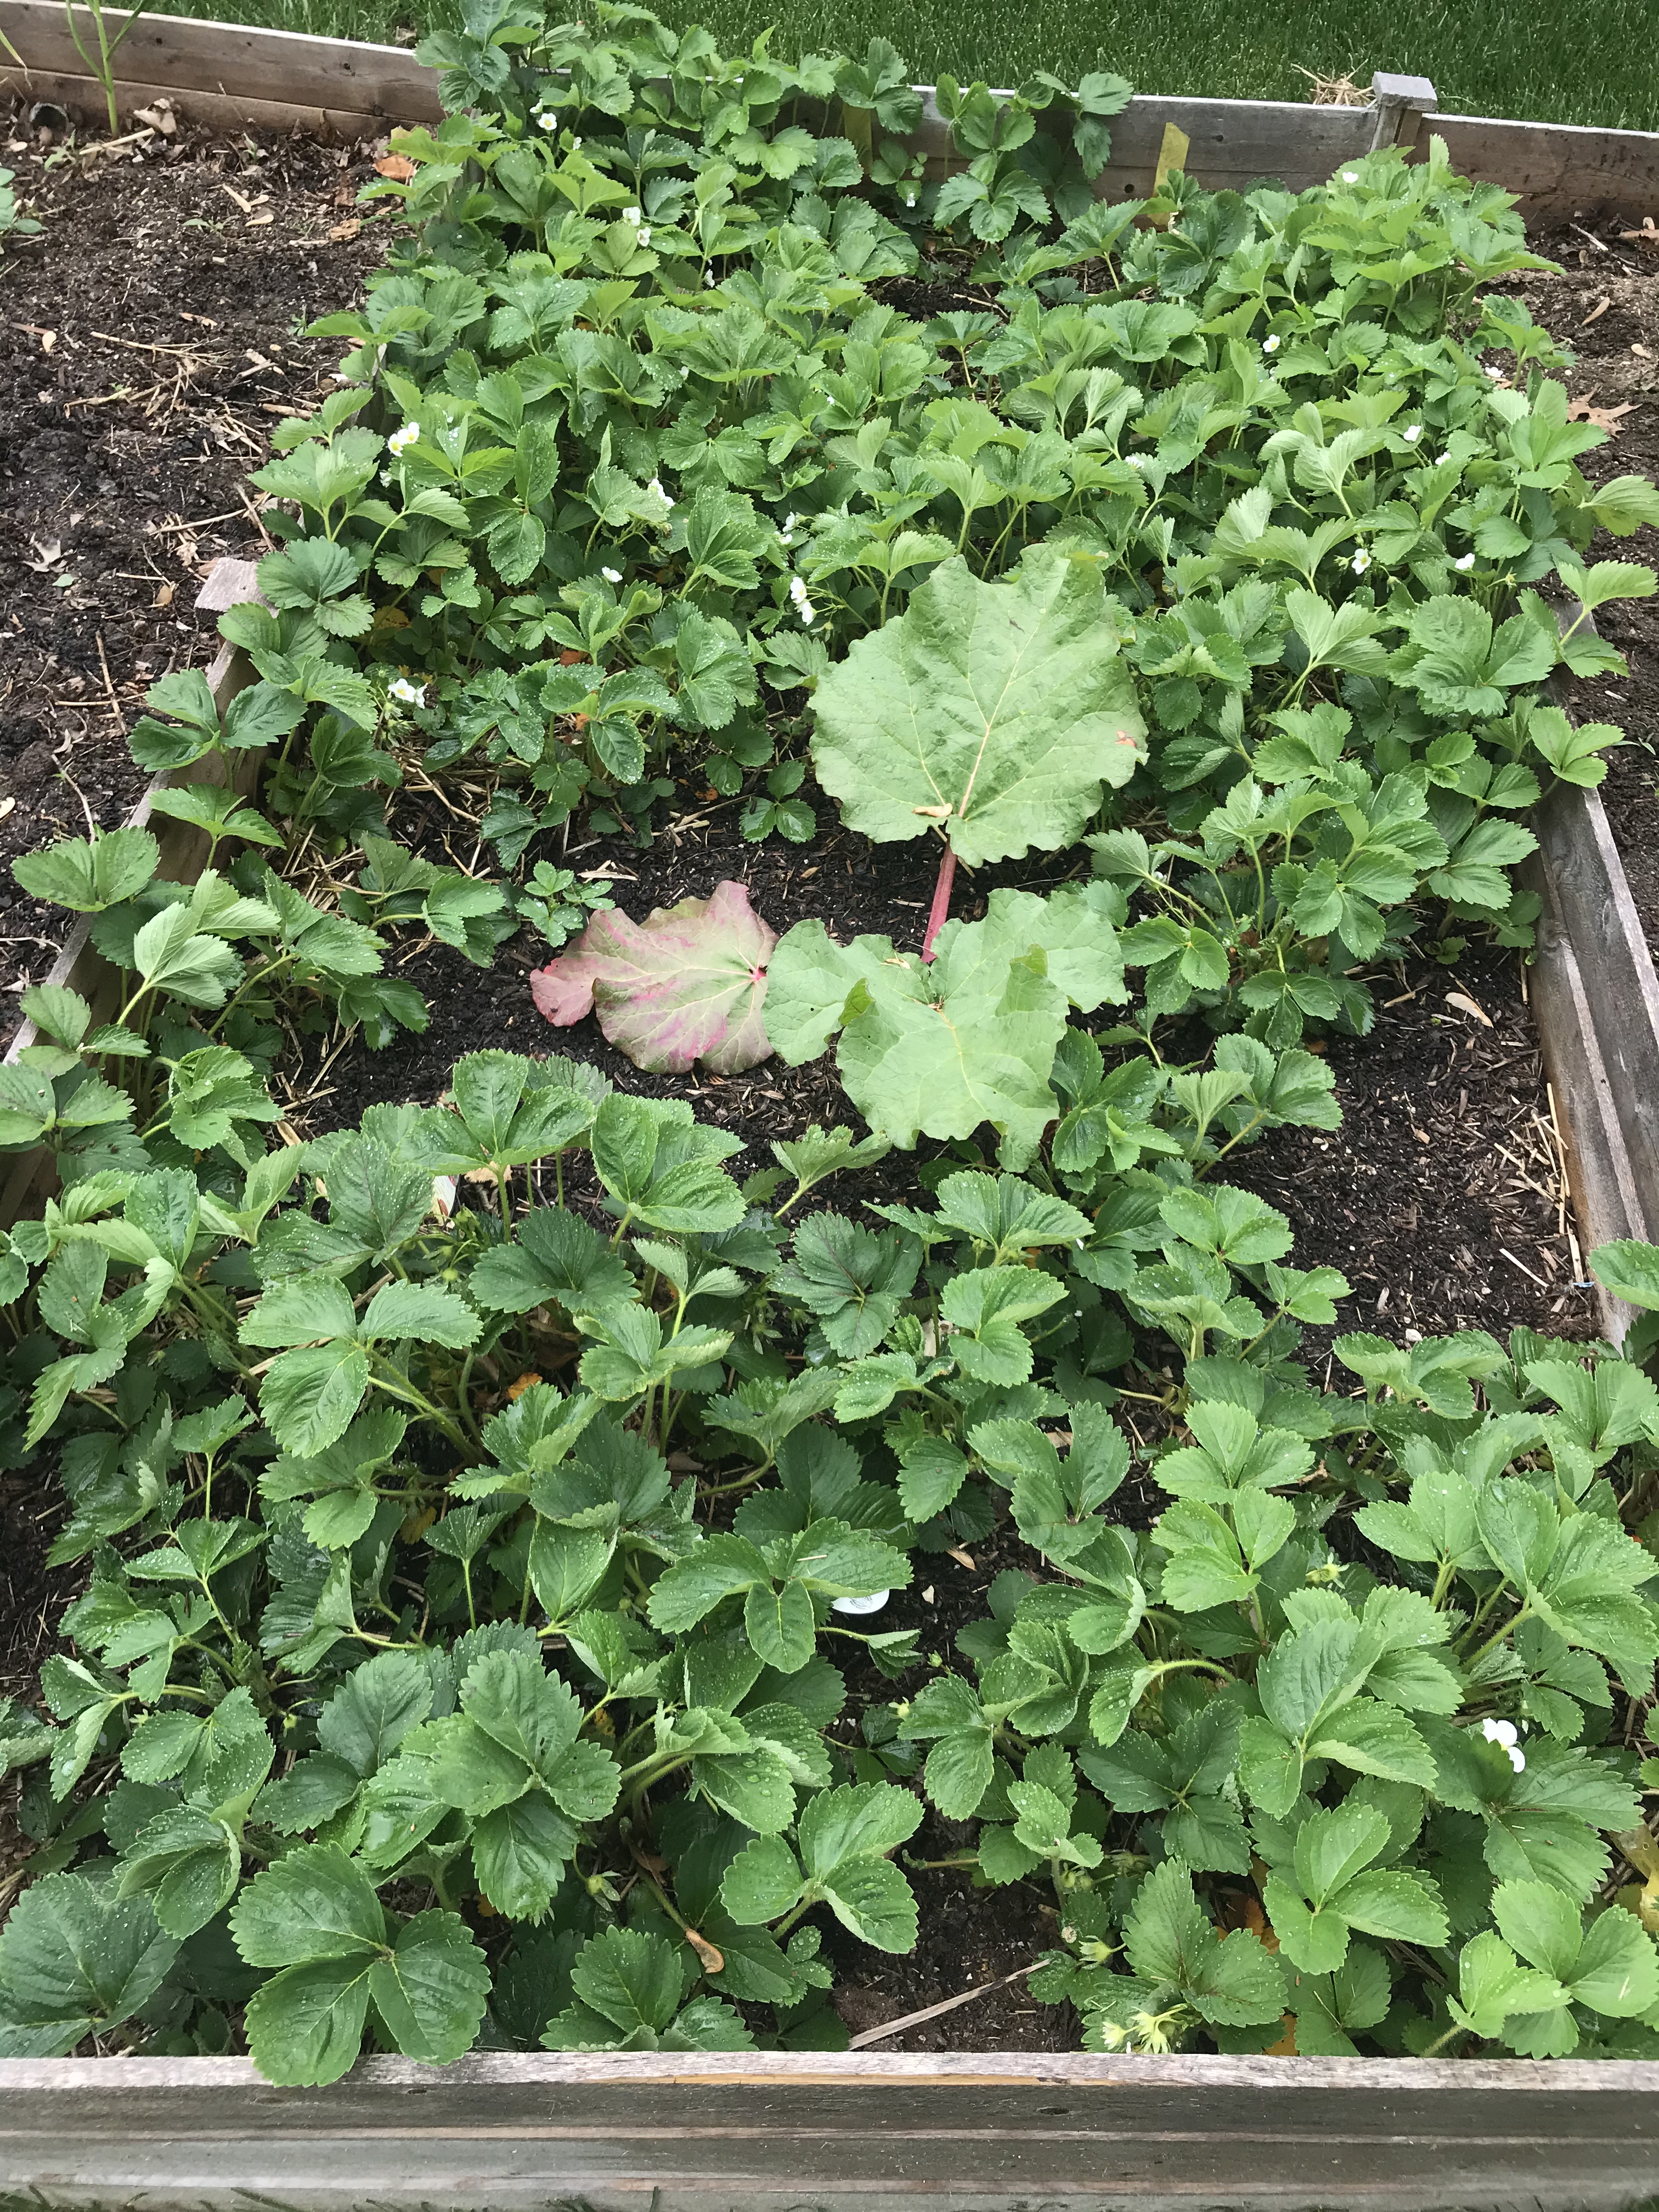 Strawberry bed from 2020 with rhubarb growing in the center. The strawberry plants have taken over the bed.